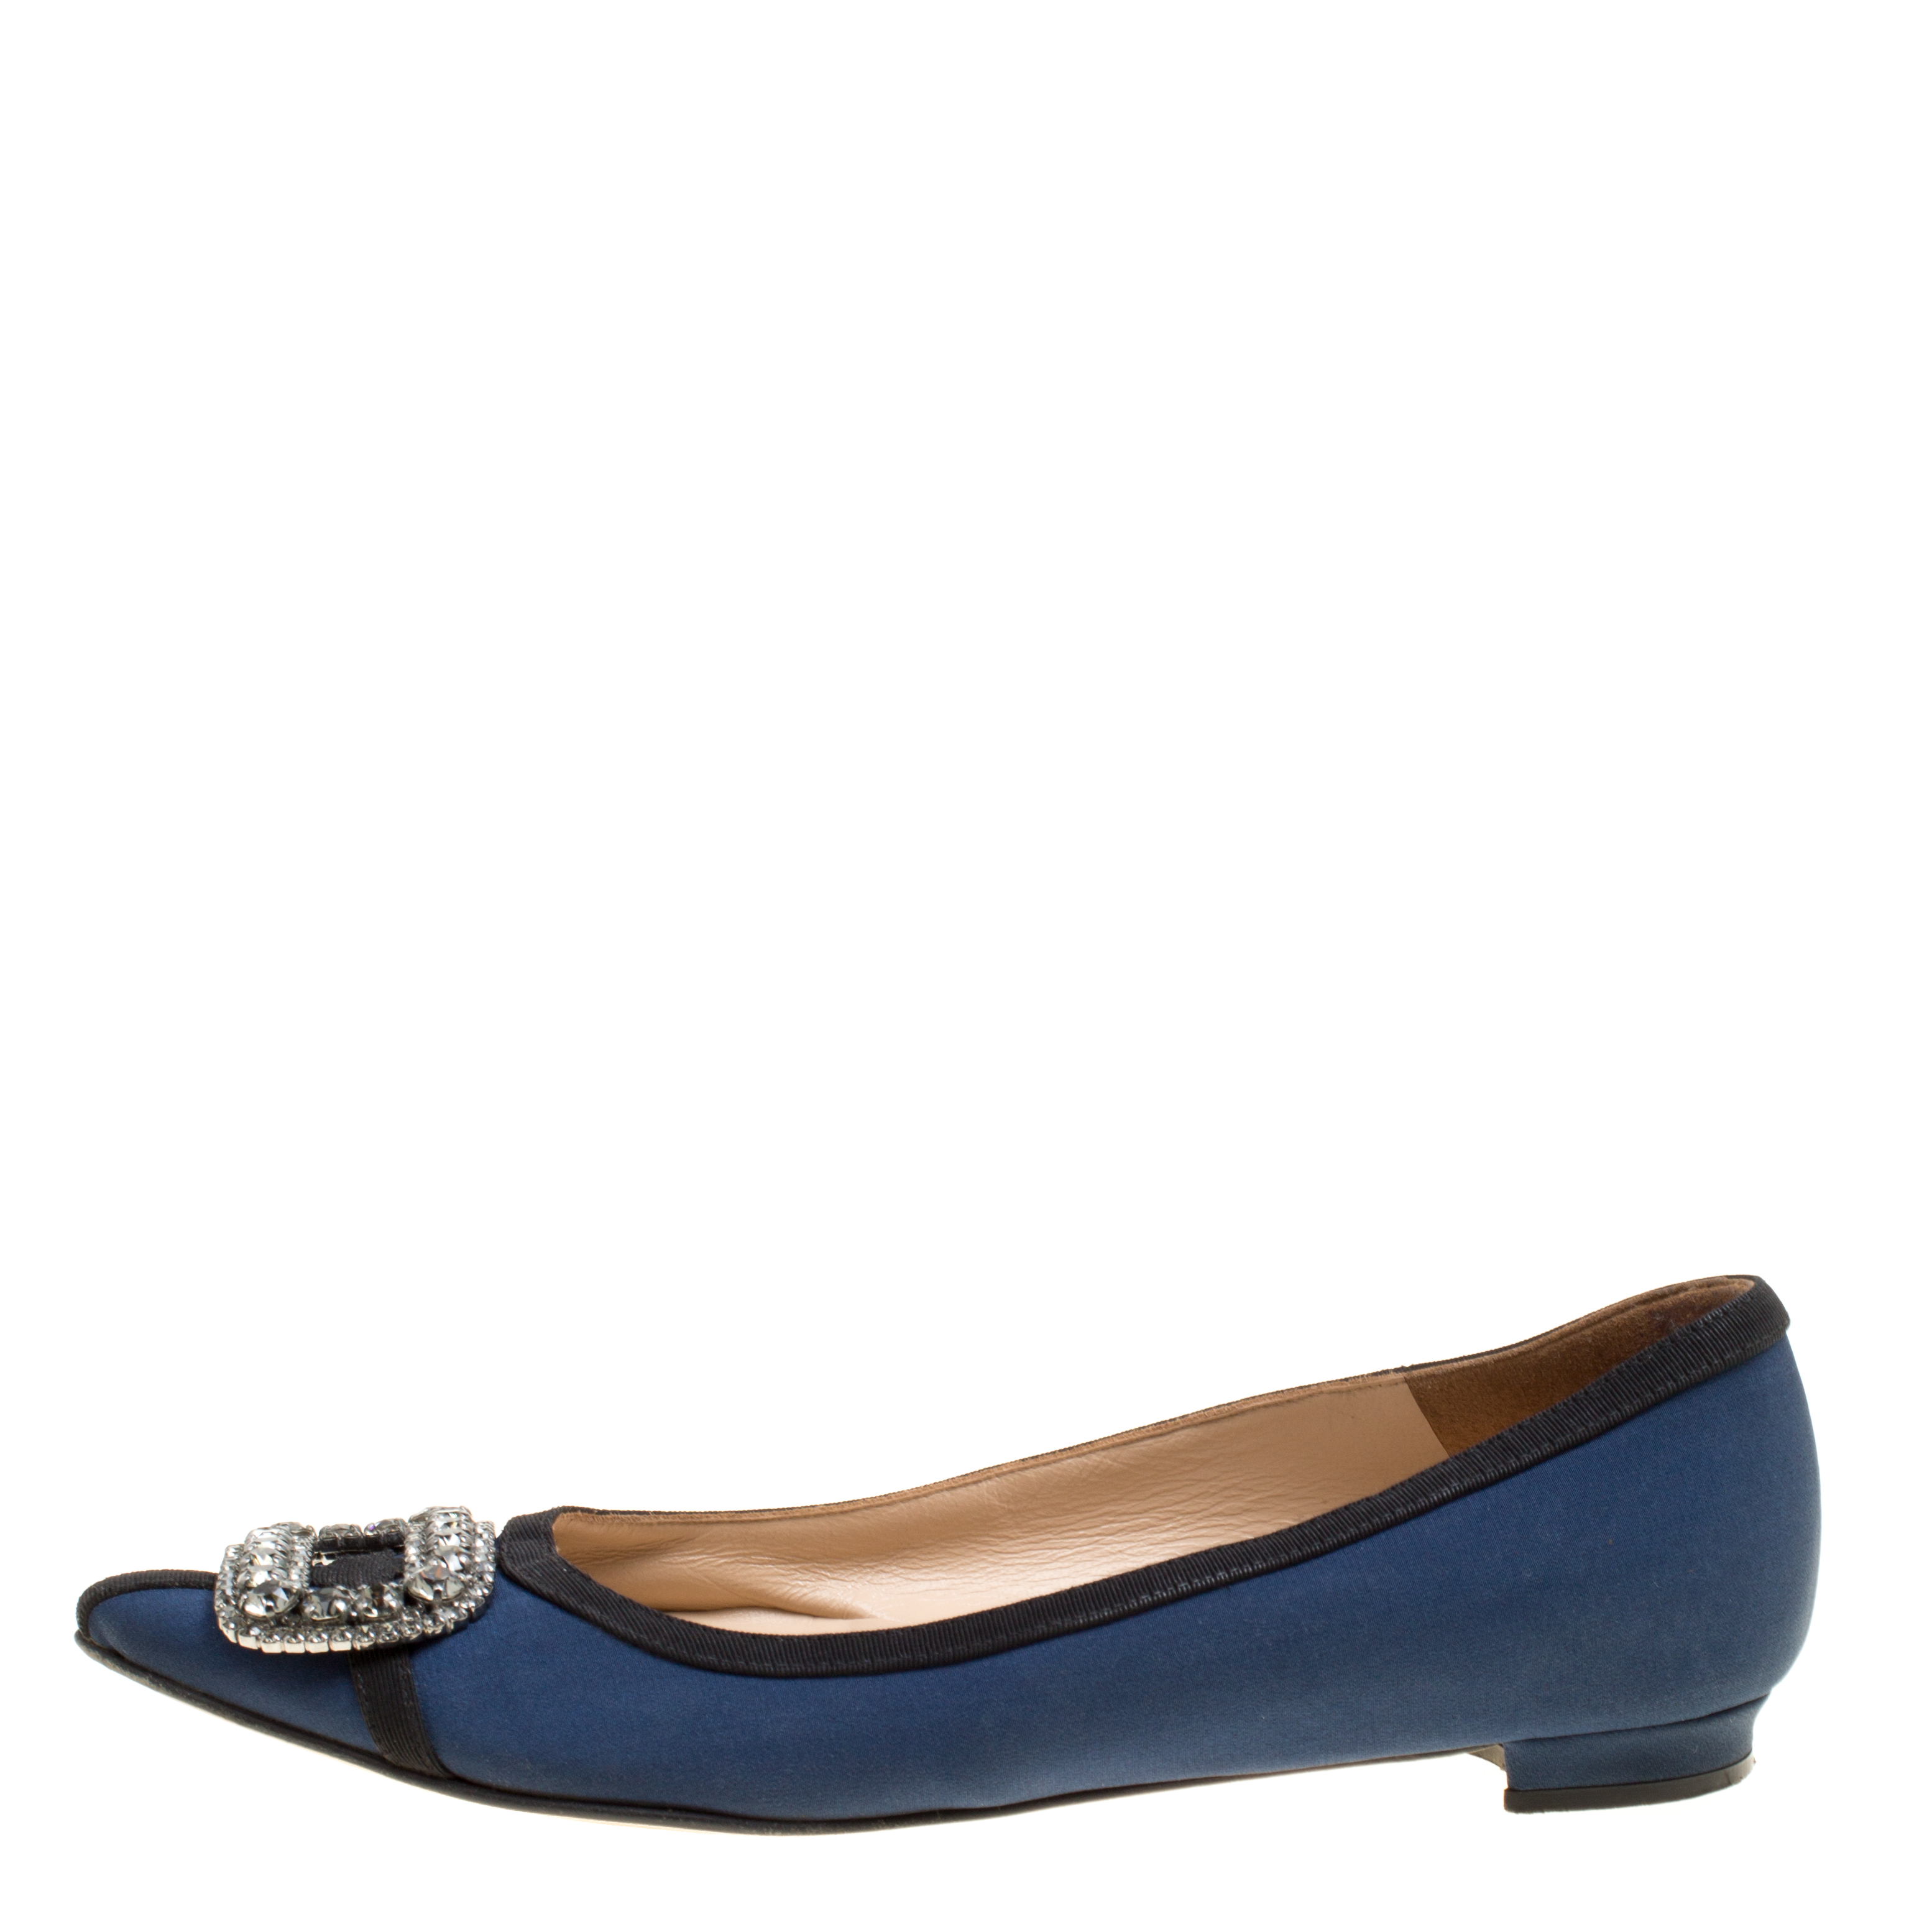 navy blue pointed toe flats